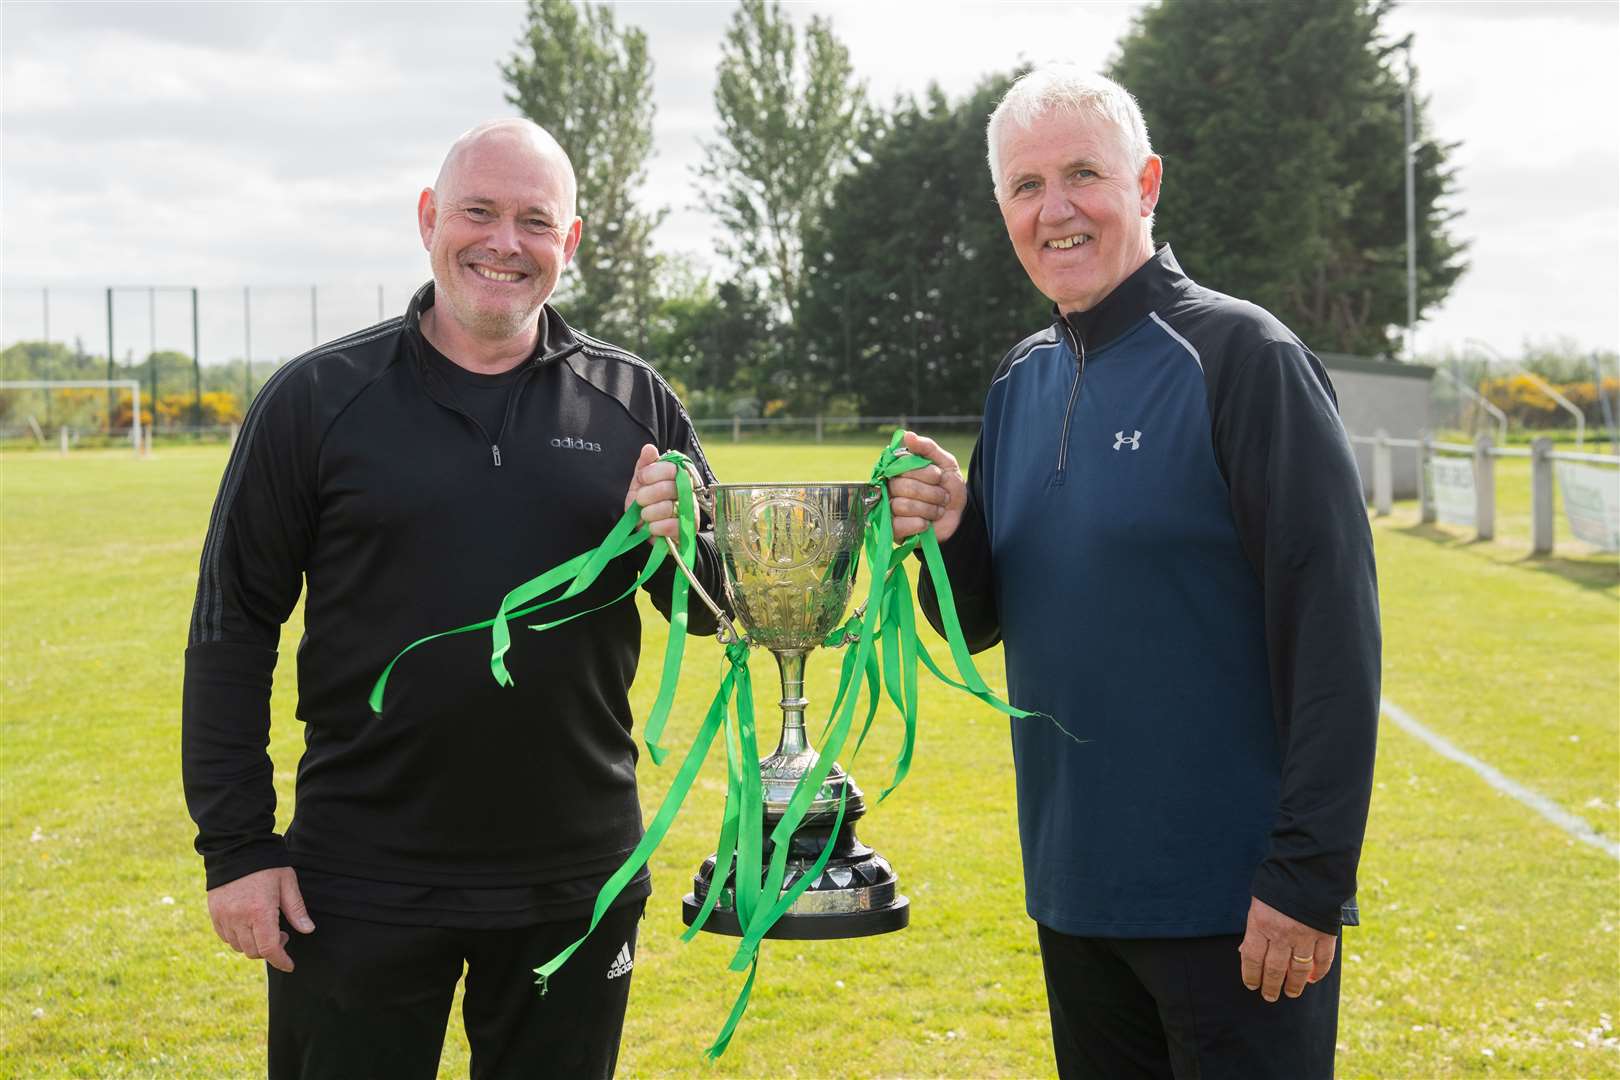 Charlie Charlesworth and Jim Stables with the trophy...Dufftown FC (2) vs Forres Thistle FC (2) - Dufftown FC win 5-3 on penalties - Elginshire Cup Final held at Logie Park, Forres 14/05/2022...Picture: Daniel Forsyth..